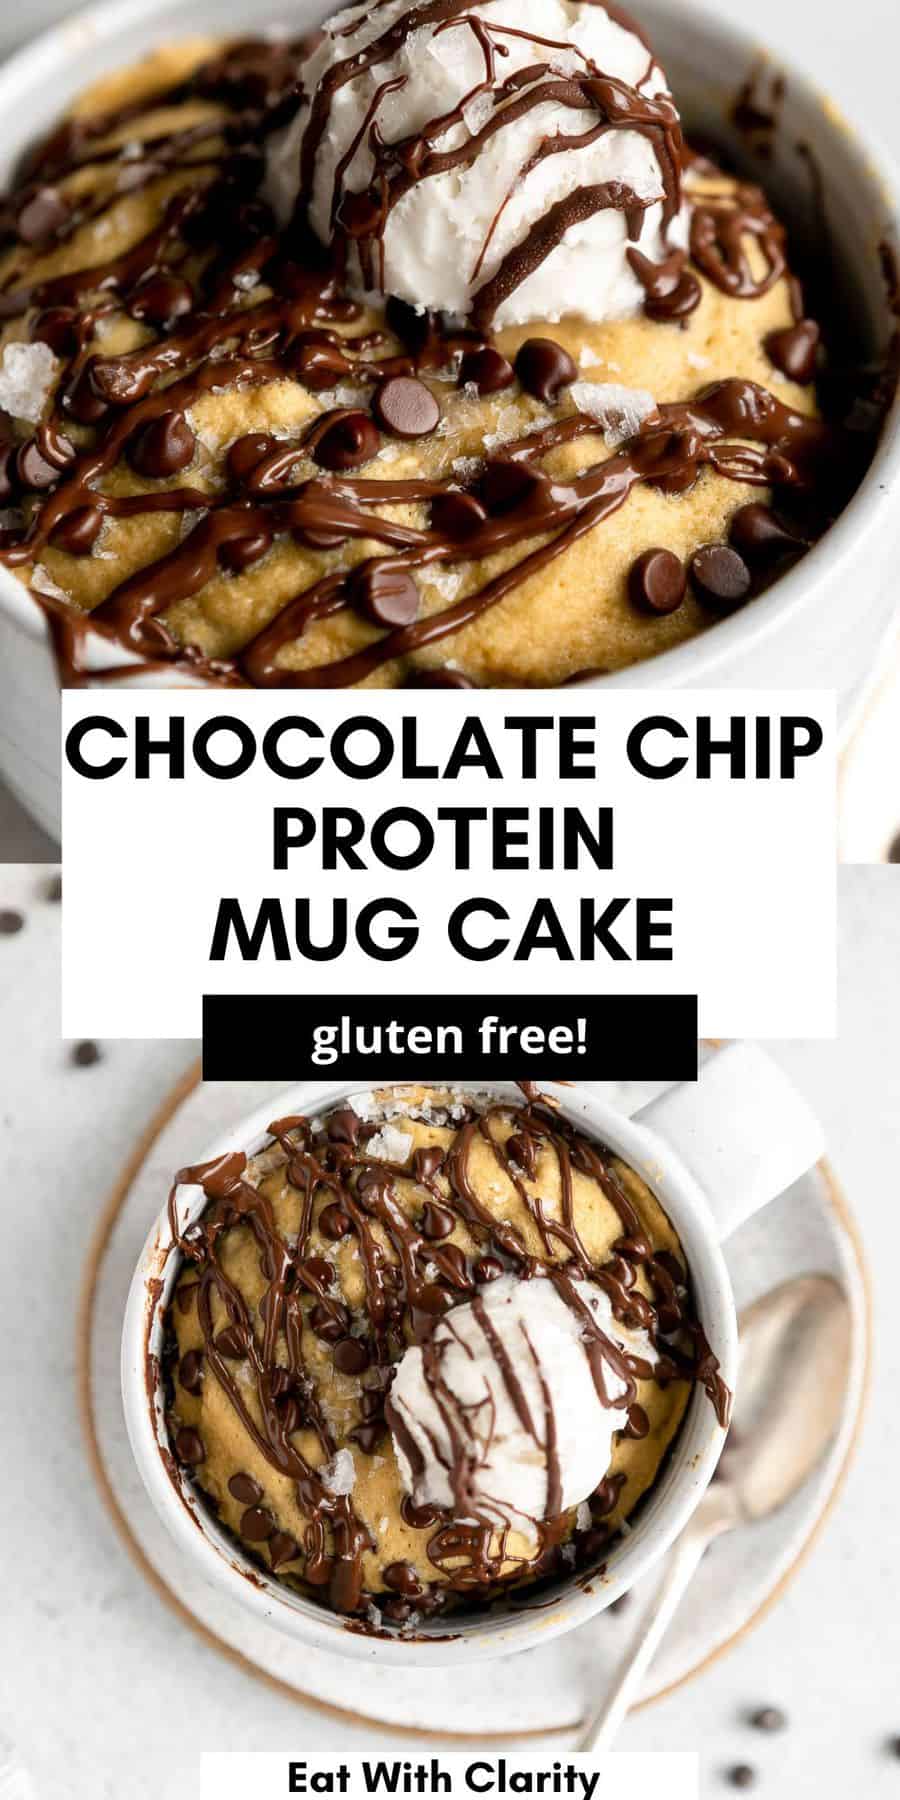 Chocolate Chip Protein Mug Cake - Eat With Clarity